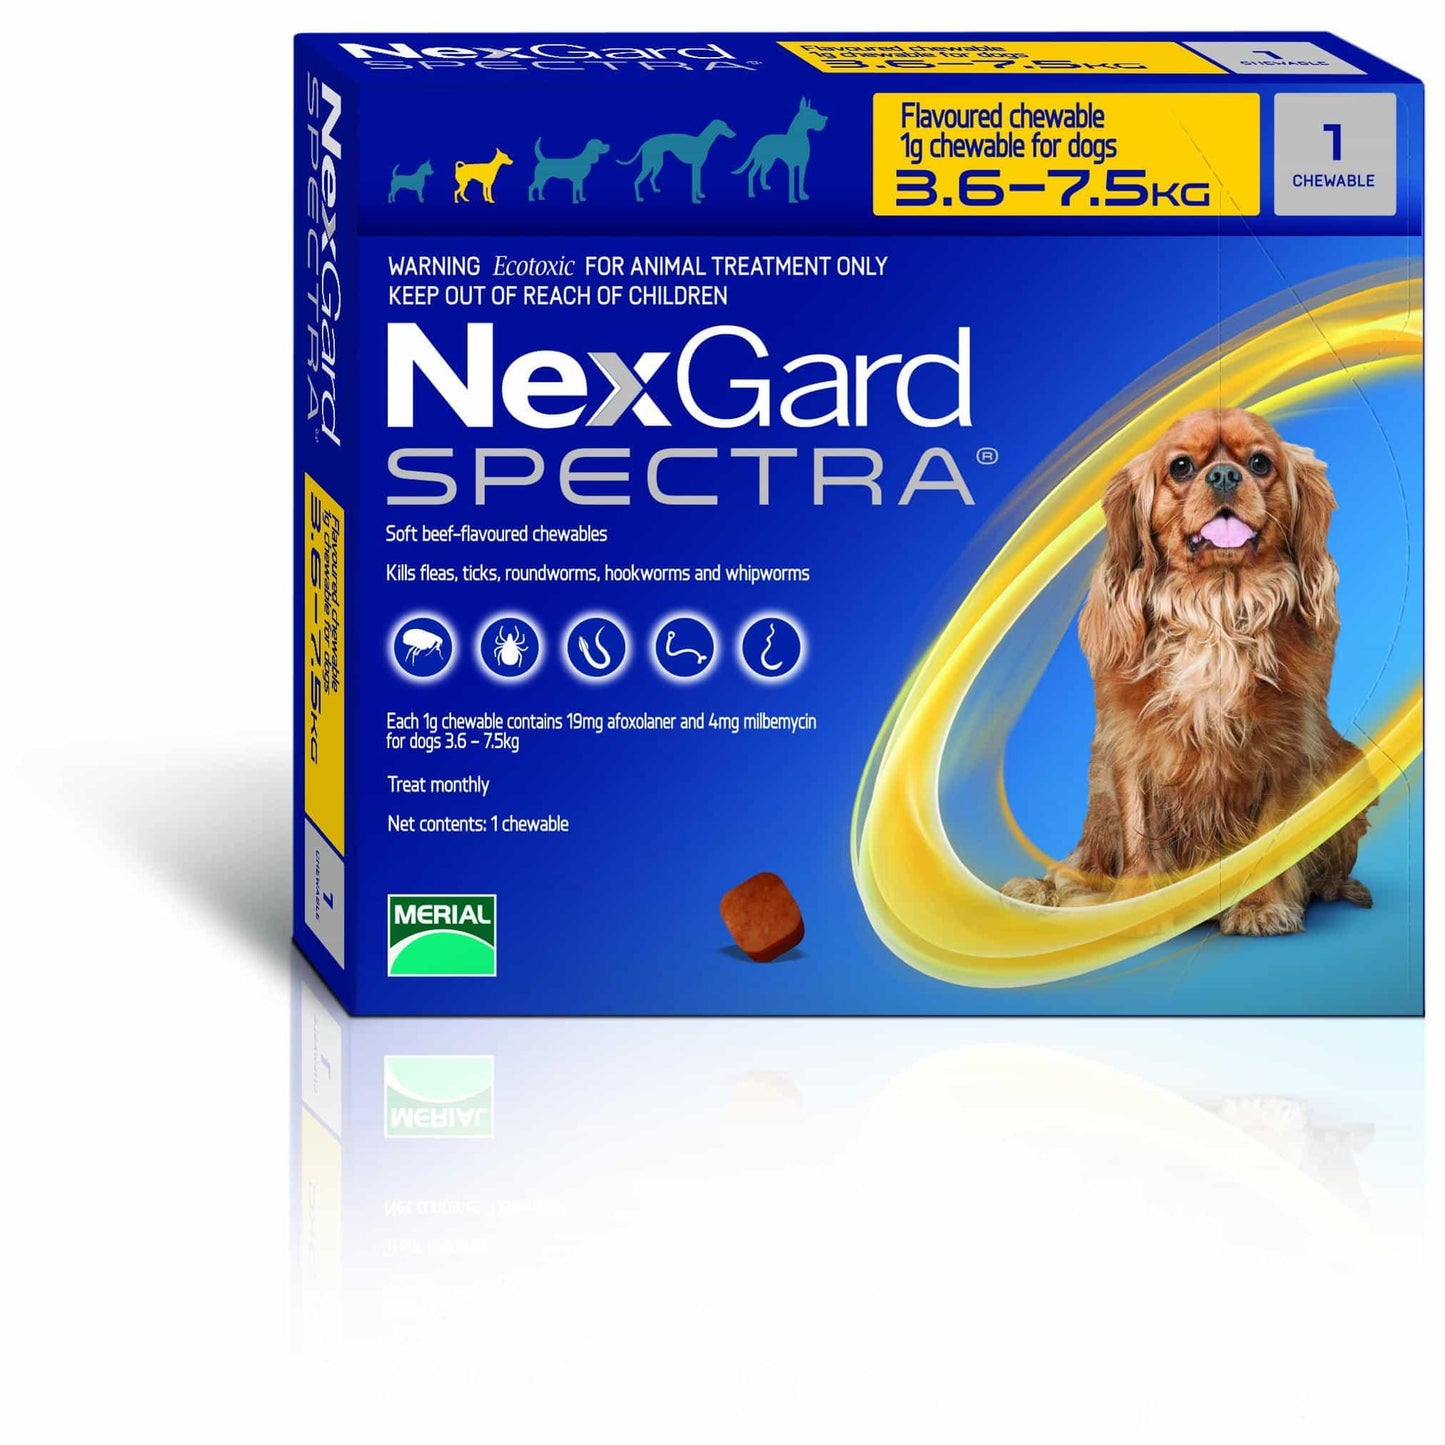 NexGard Spectra Chewables for Small Dogs 3.6-7.5kg